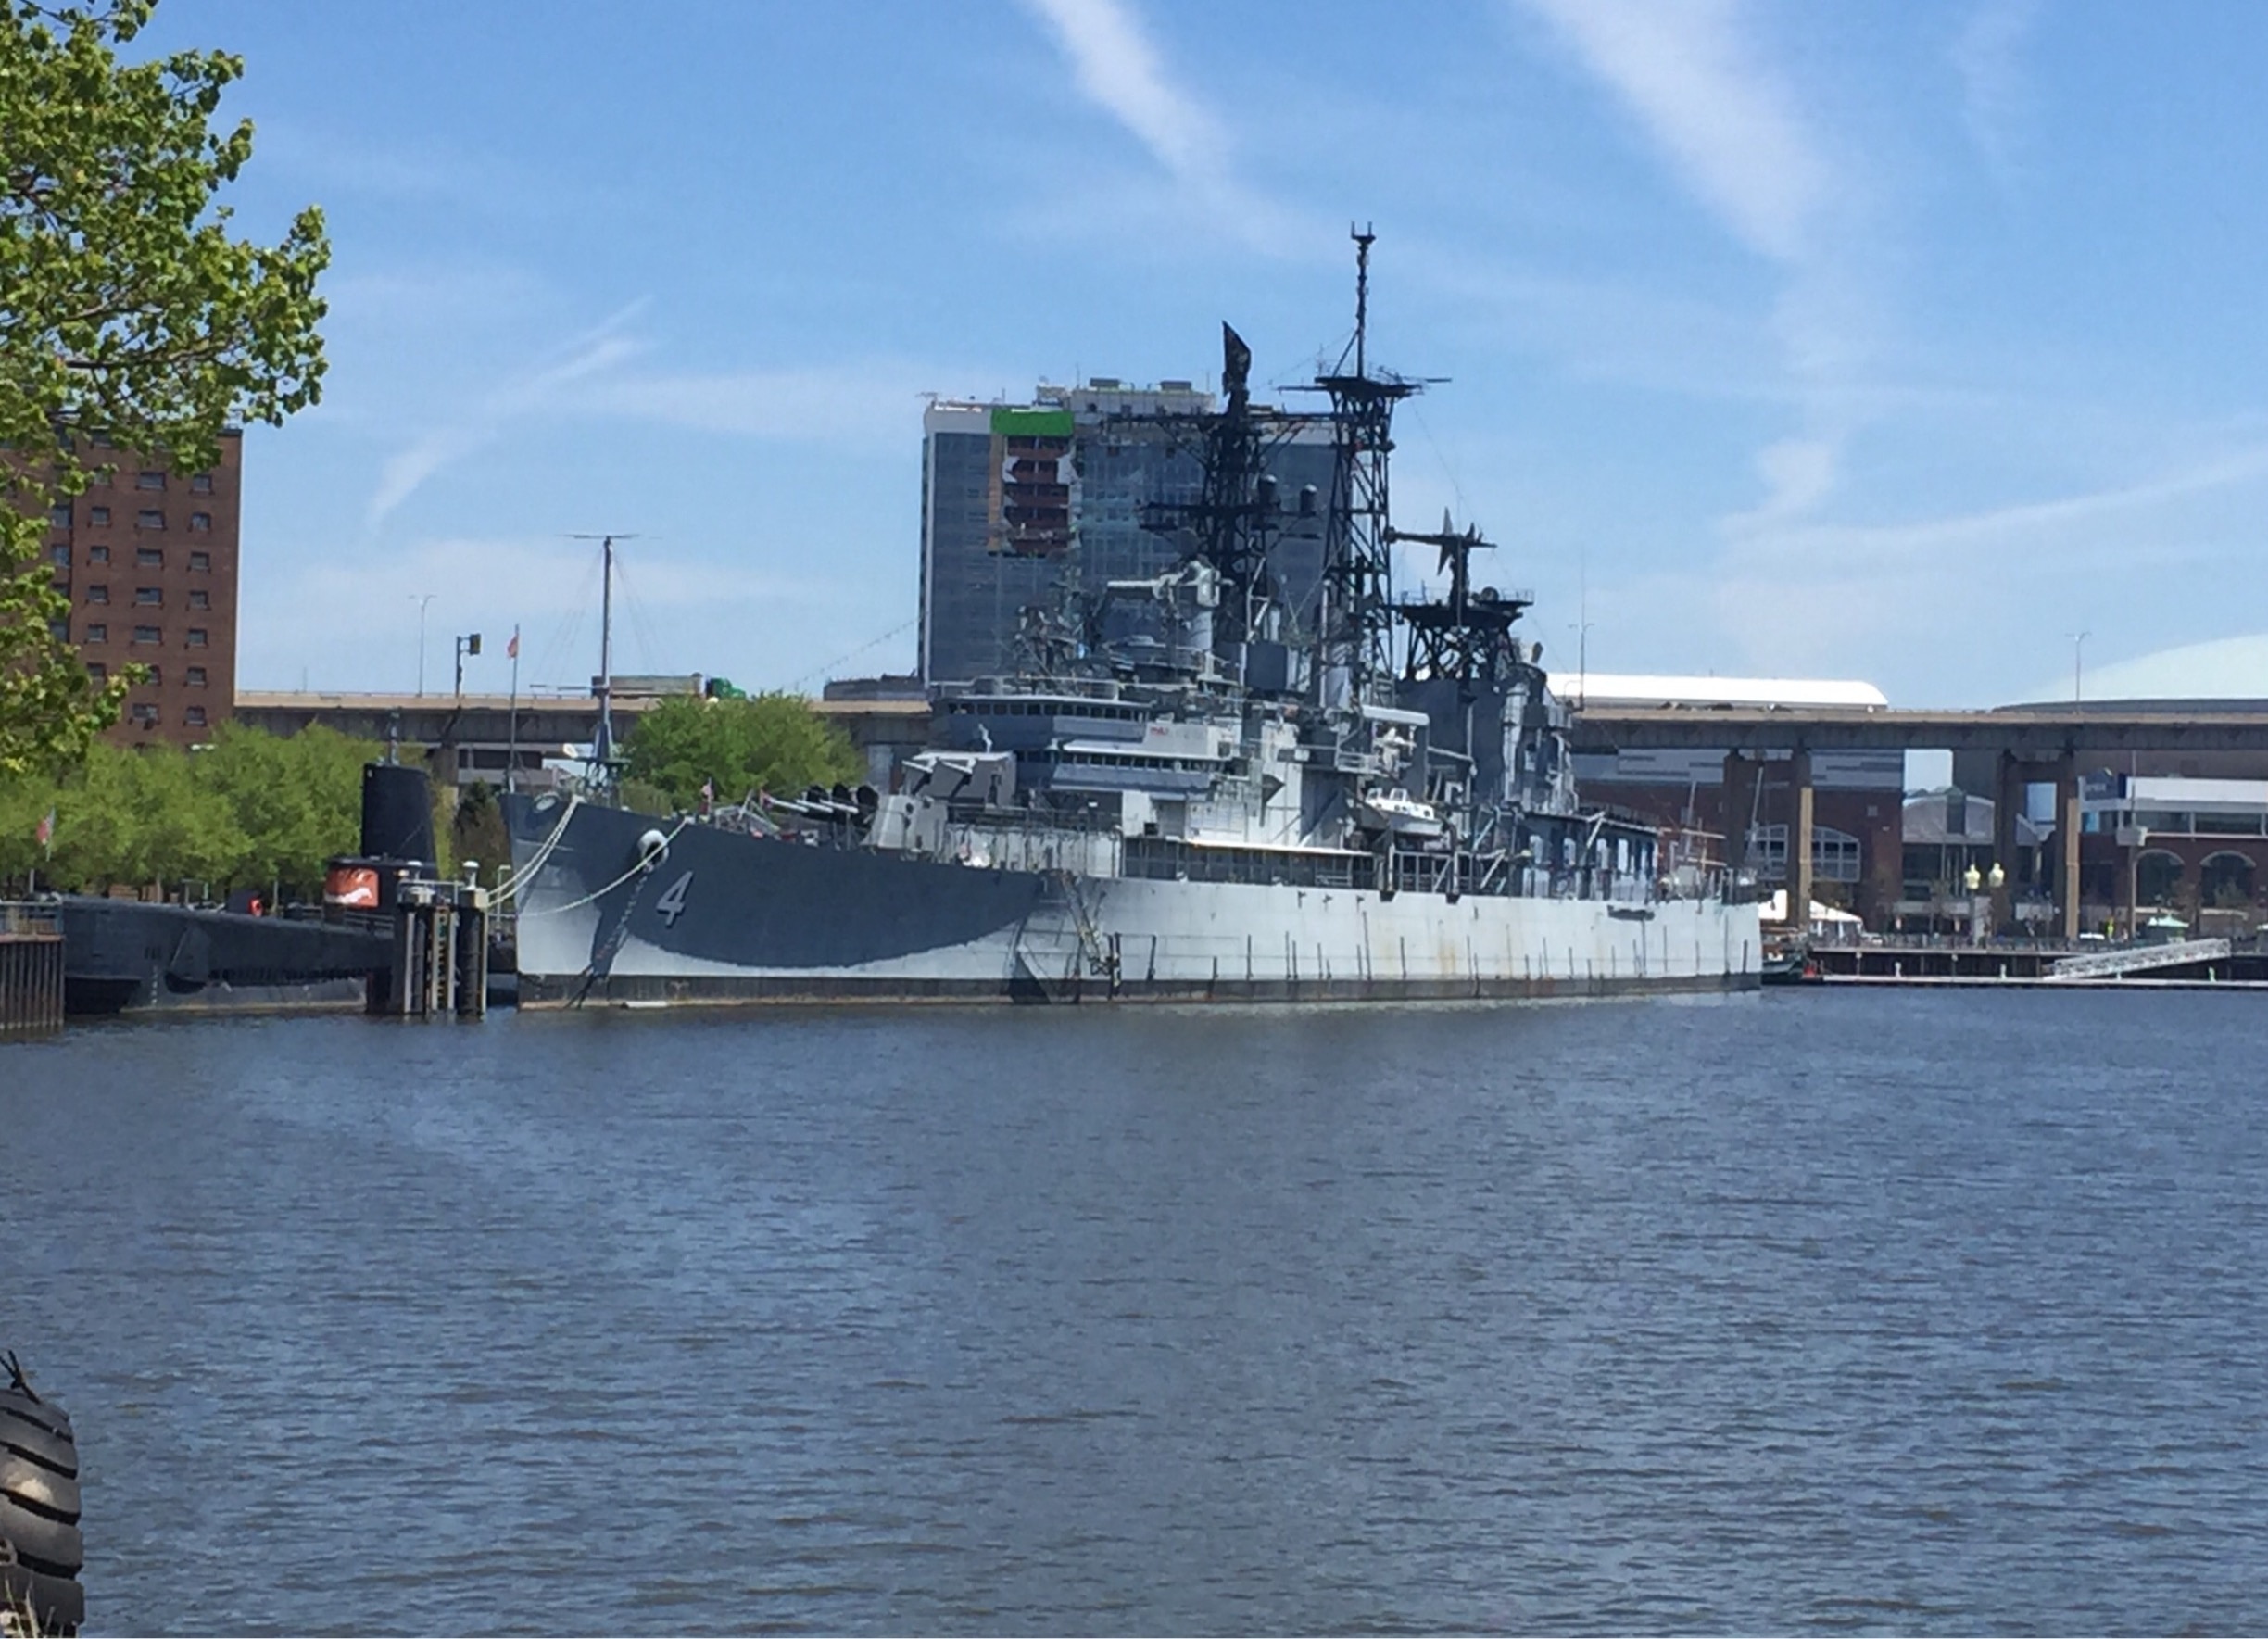 The USS Little Rock and the submarine, USS Croaker just to the left. Both are open for tours.